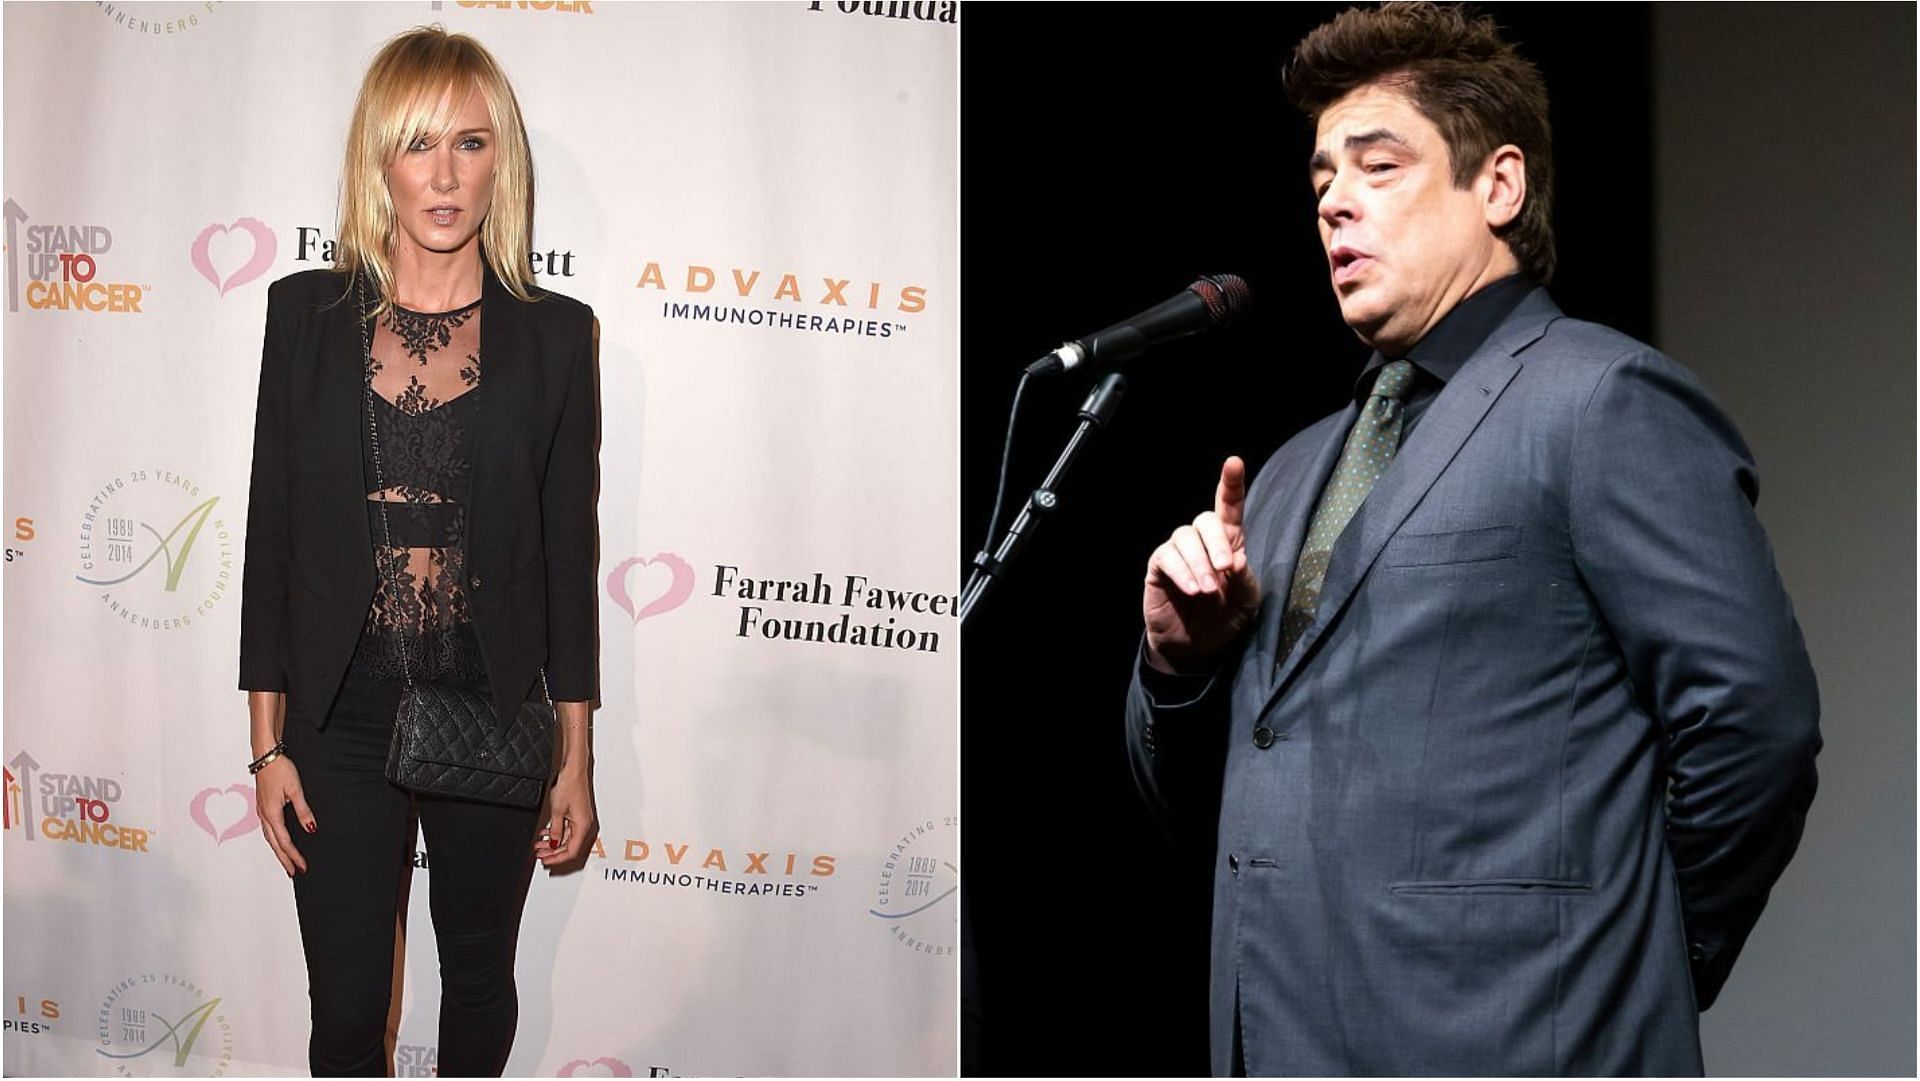 Kimberly Stewart and Benicio del Toro were romantically linked for some time in 2010 (Images via Steve Granitz and Gabriel Kuchta/Getty Images)